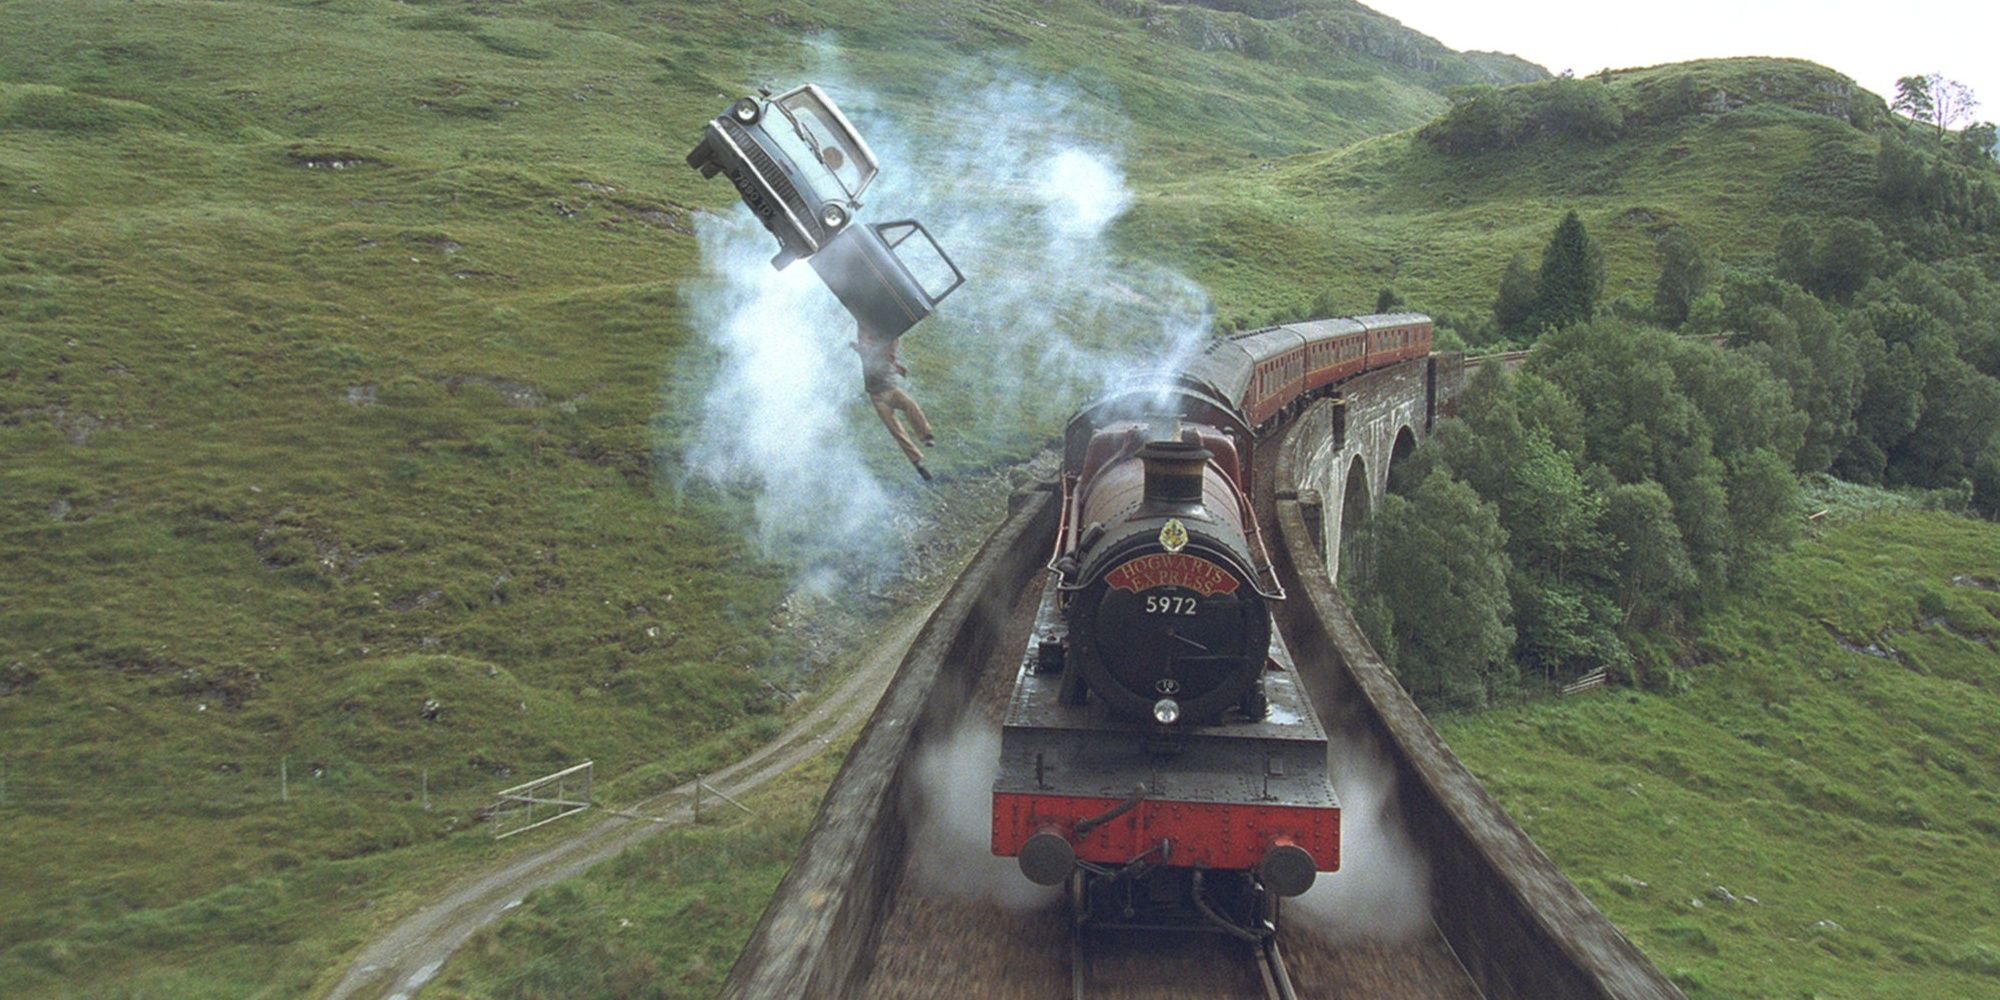 Weasley flying car and Hogwarts Express on the way to Hogwarts in Harry Potter and the Chamber of Secrets